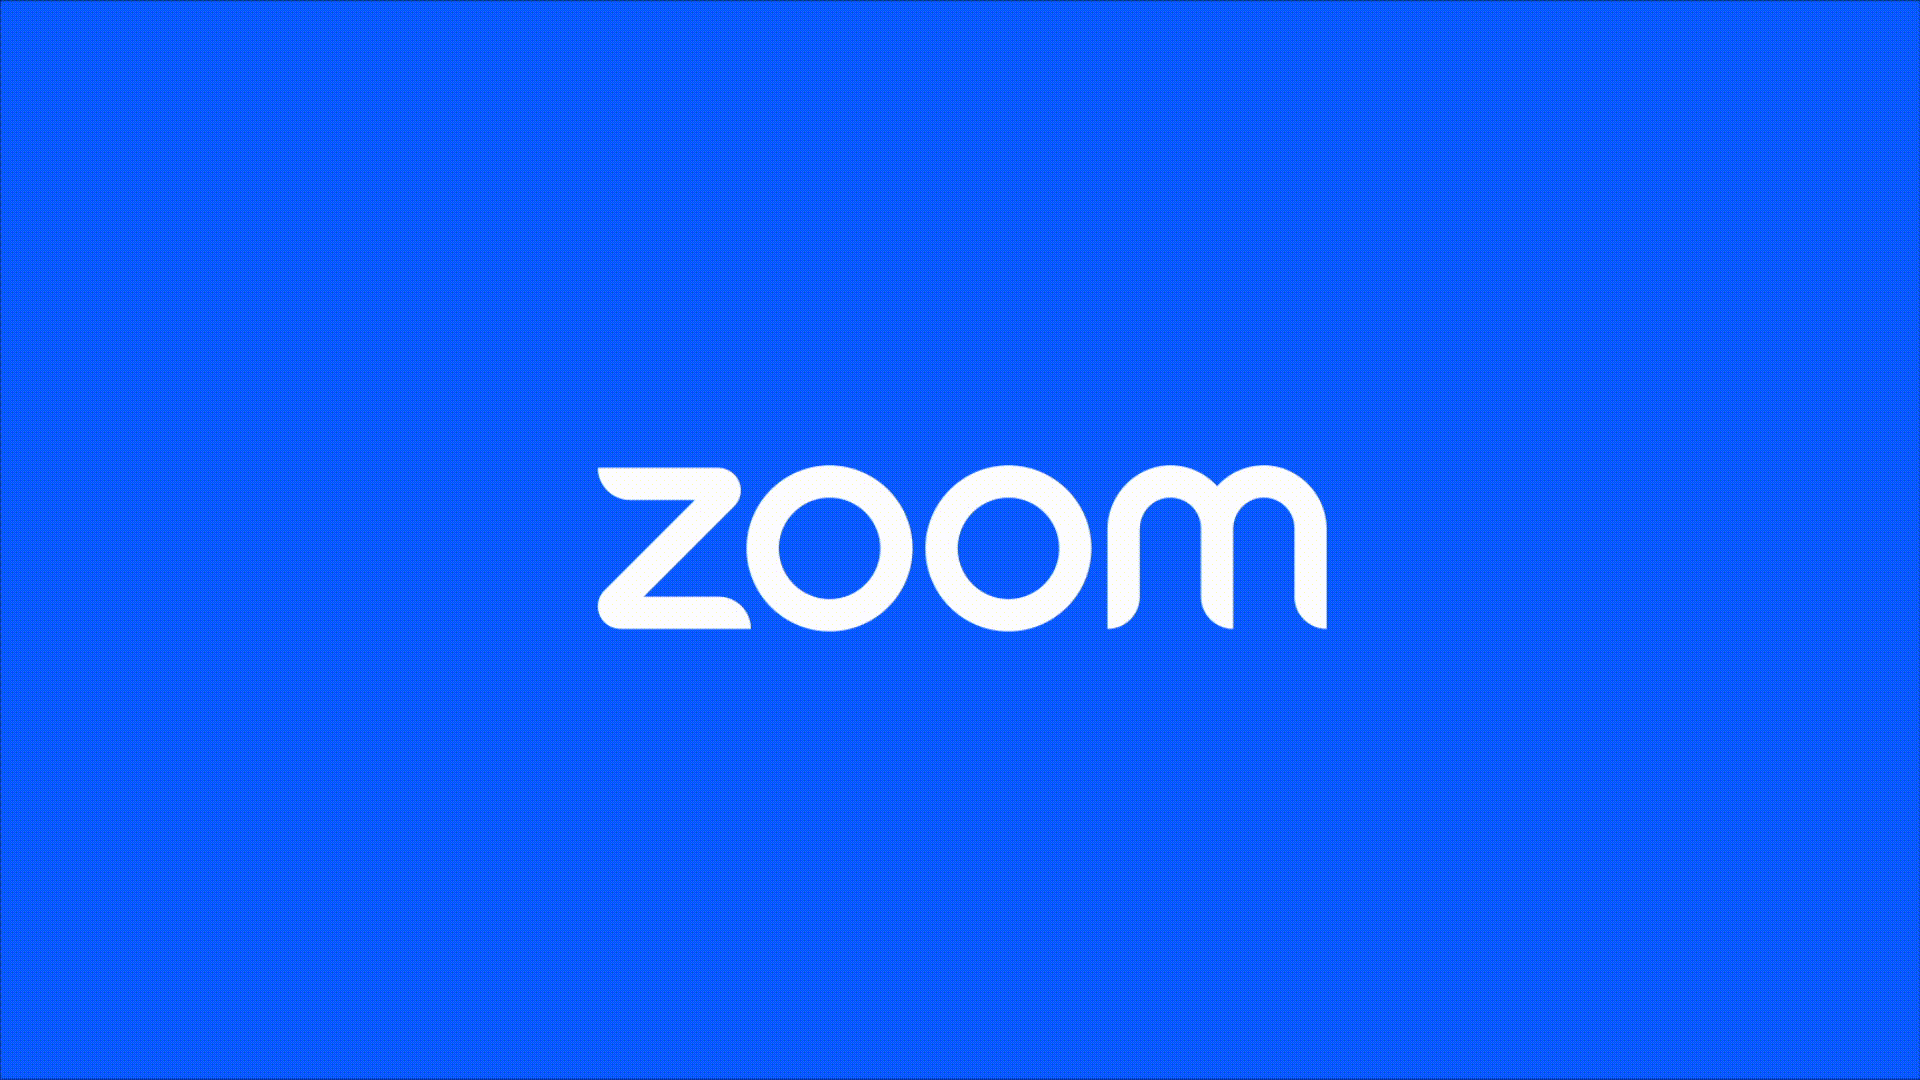 Coming Zoom to a Zoom Near You